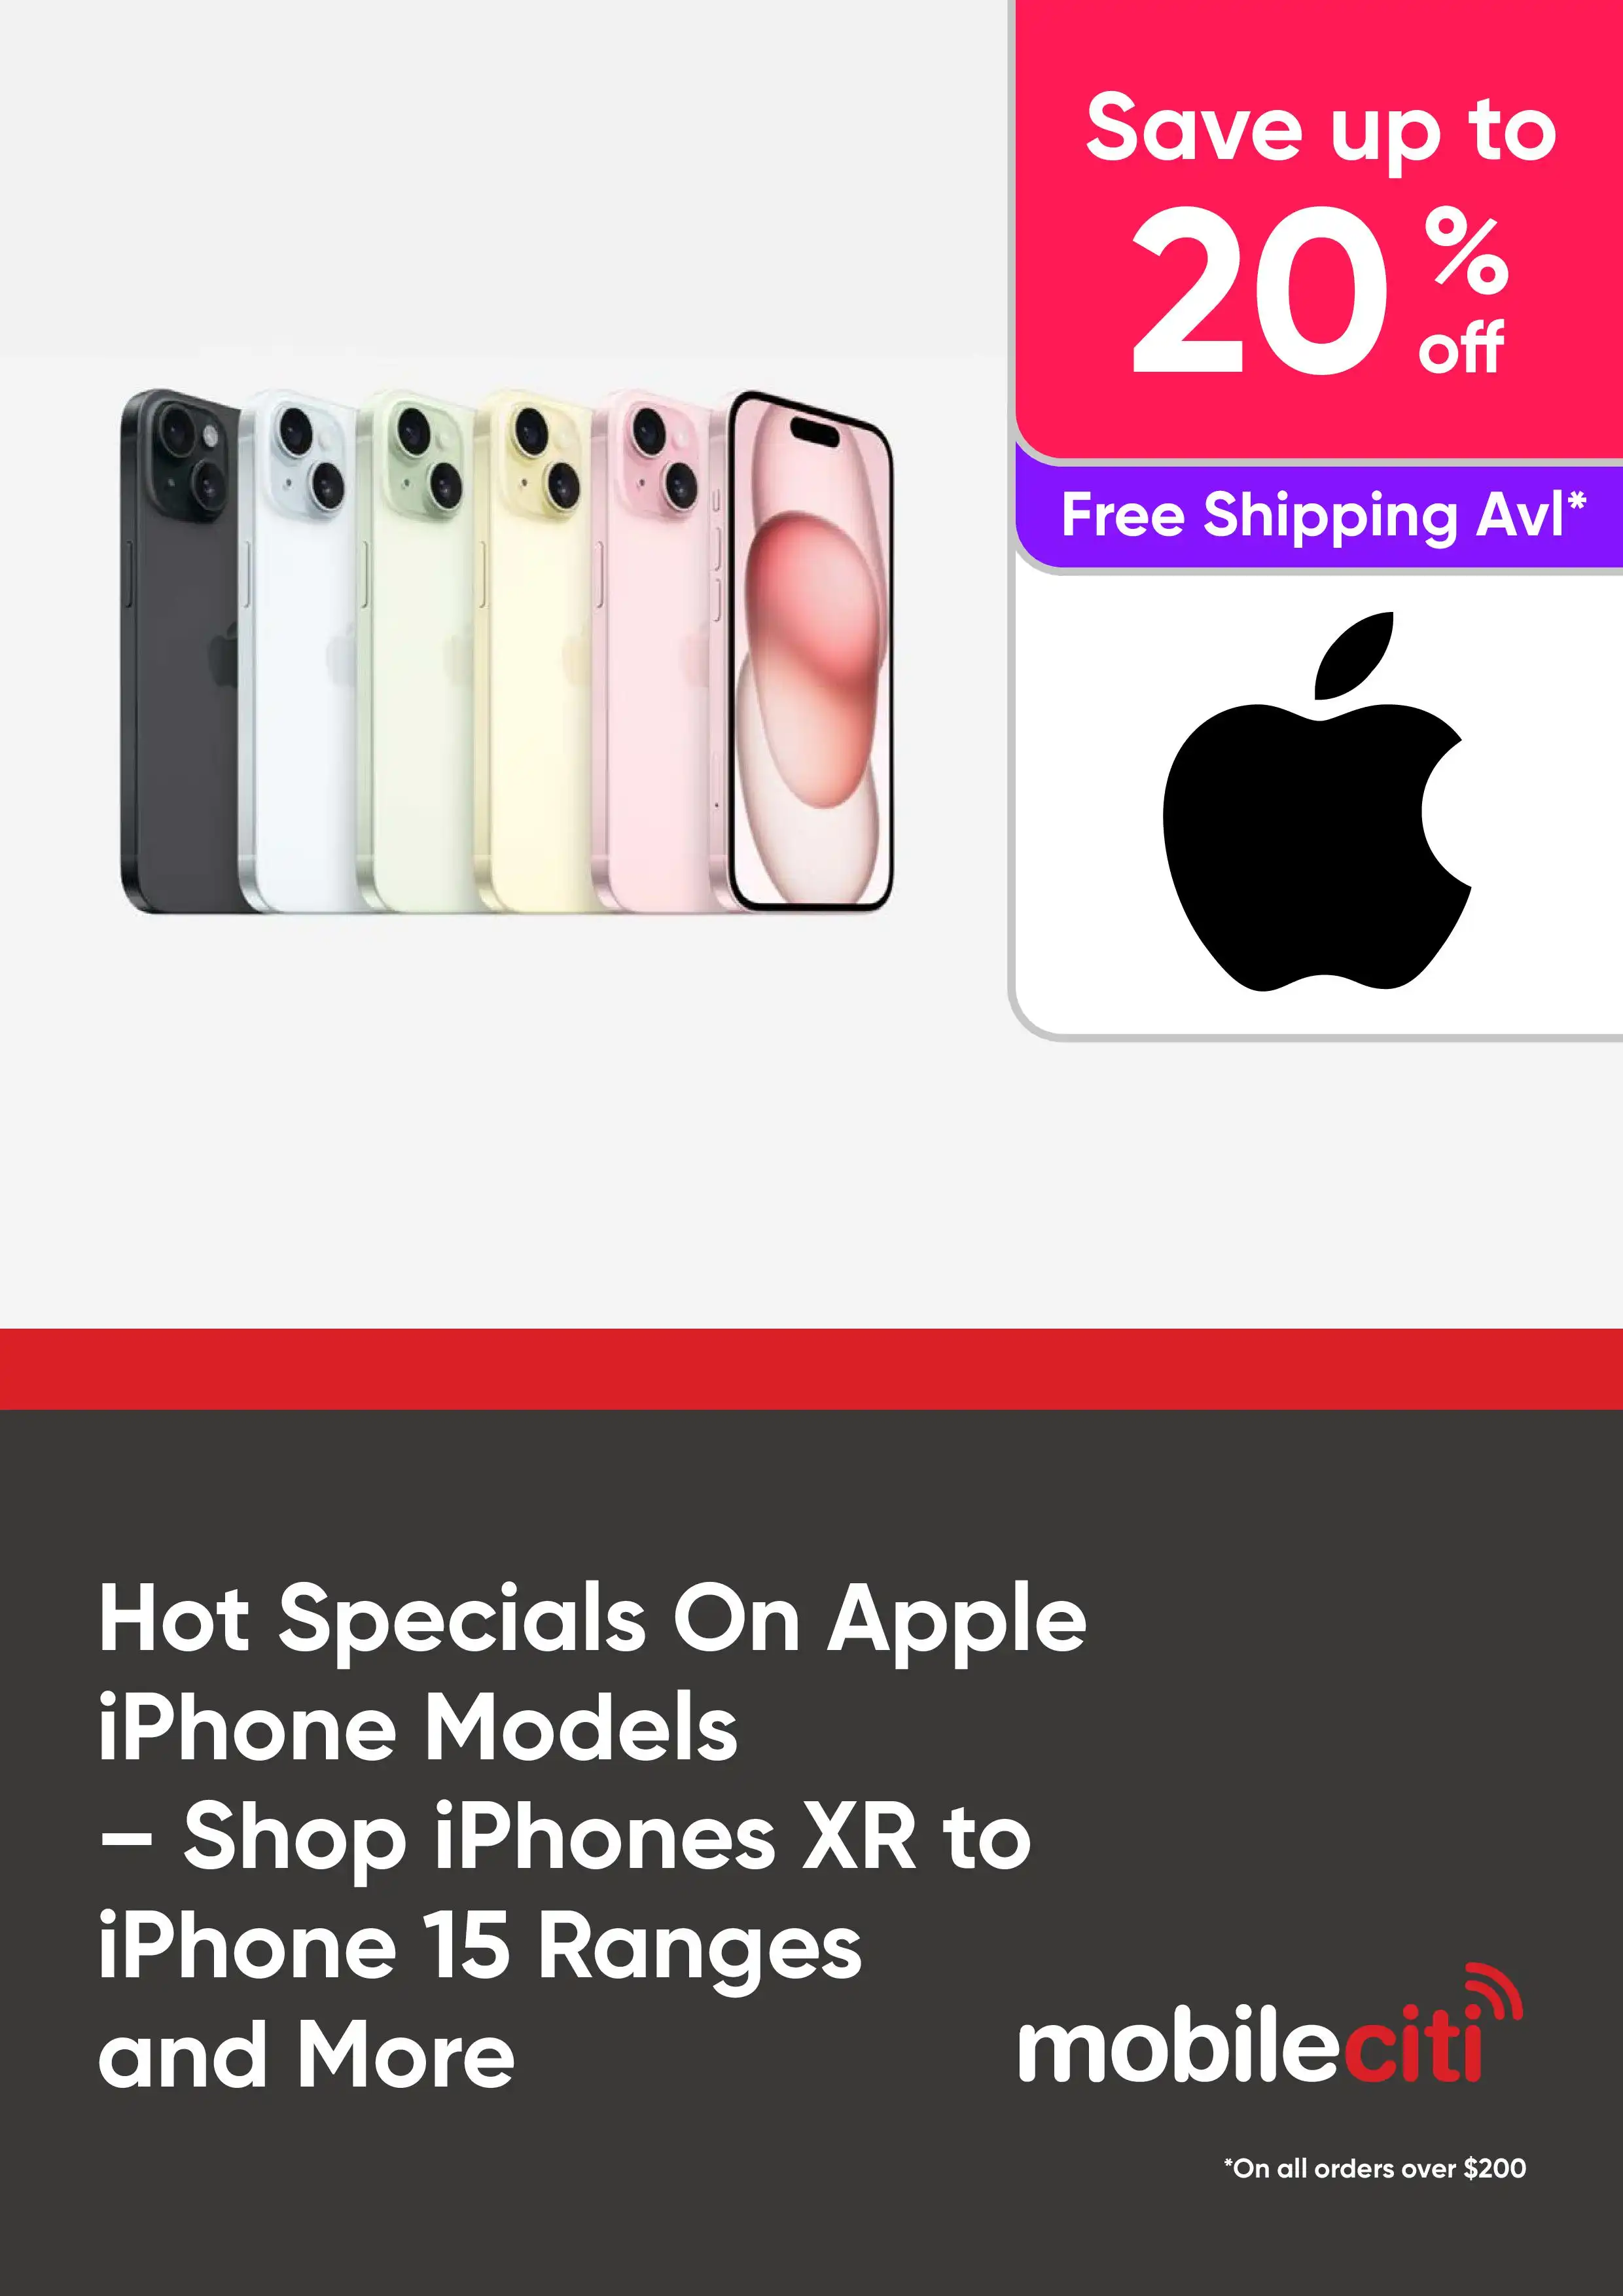 Hot Specials On Apple iPhone Models - Save Up to 20% Off iPhones XR to iPhone 15 Ranges and More